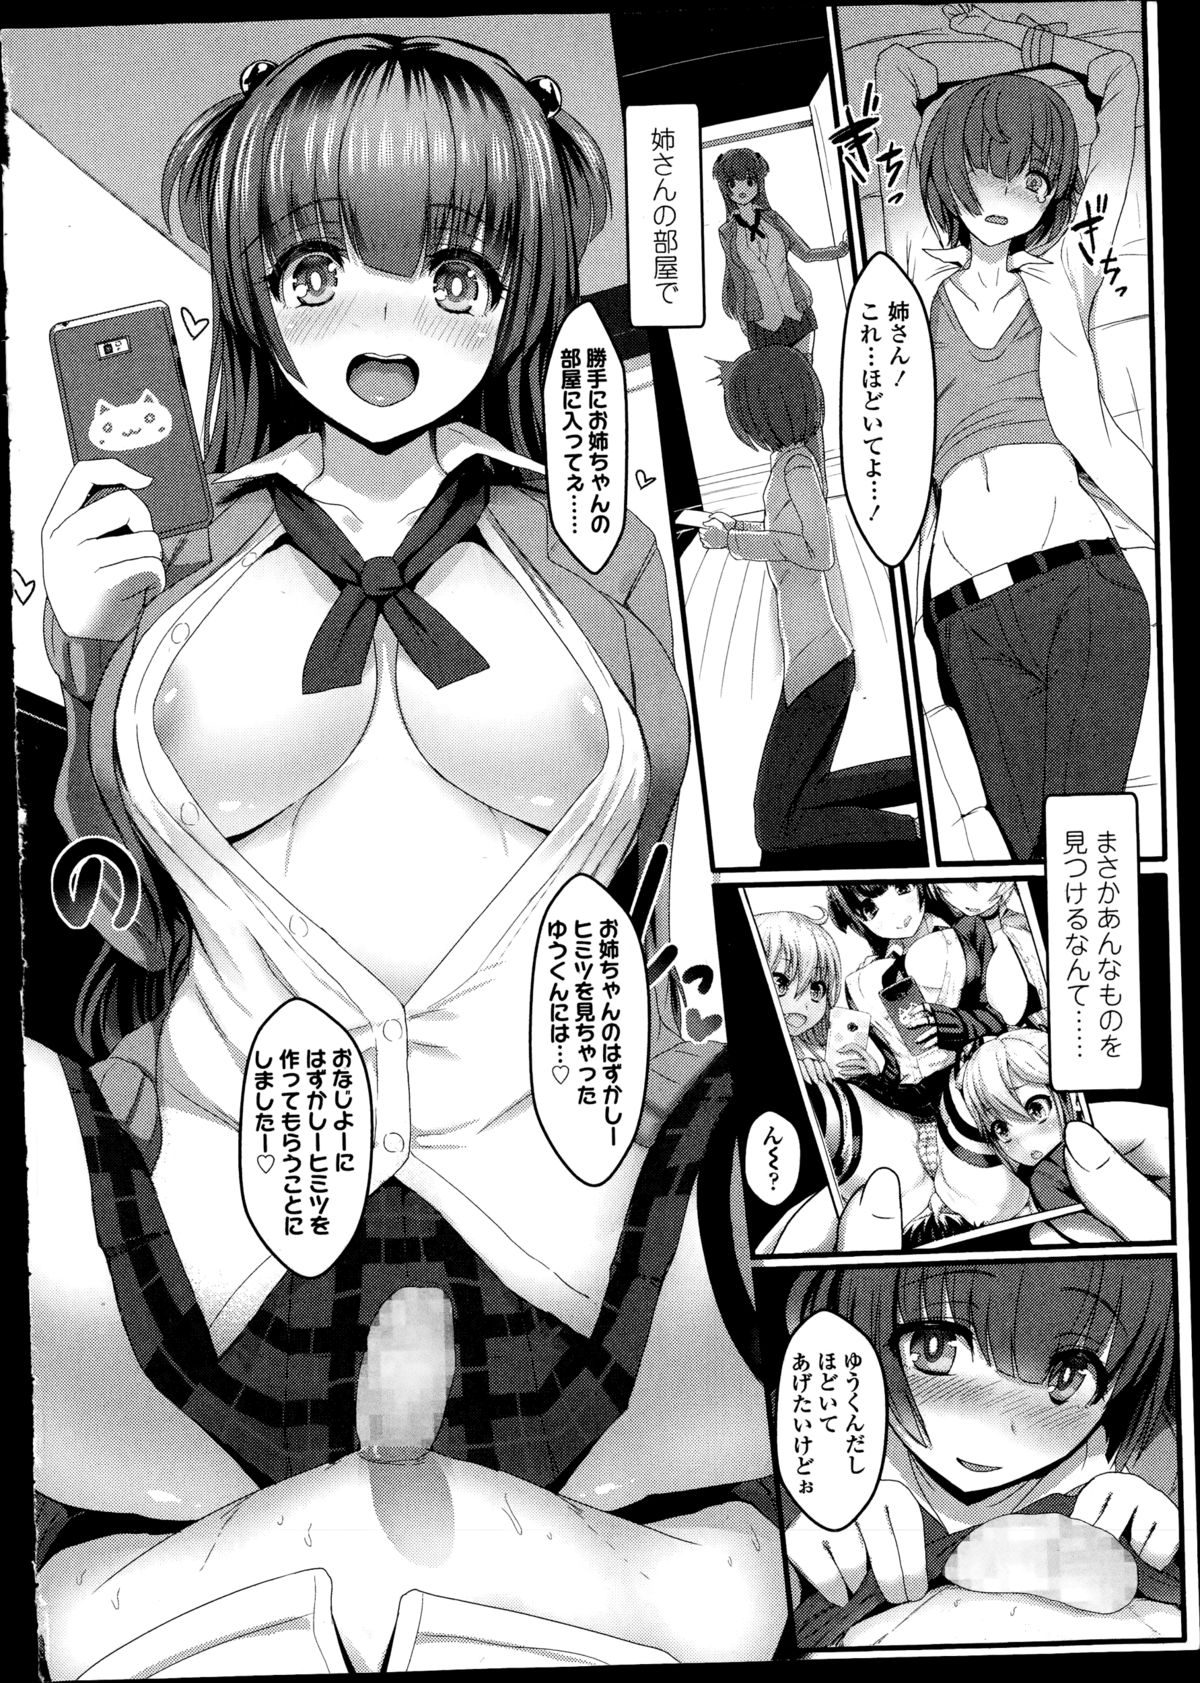 Girls forM Vol. 08 page 8 full